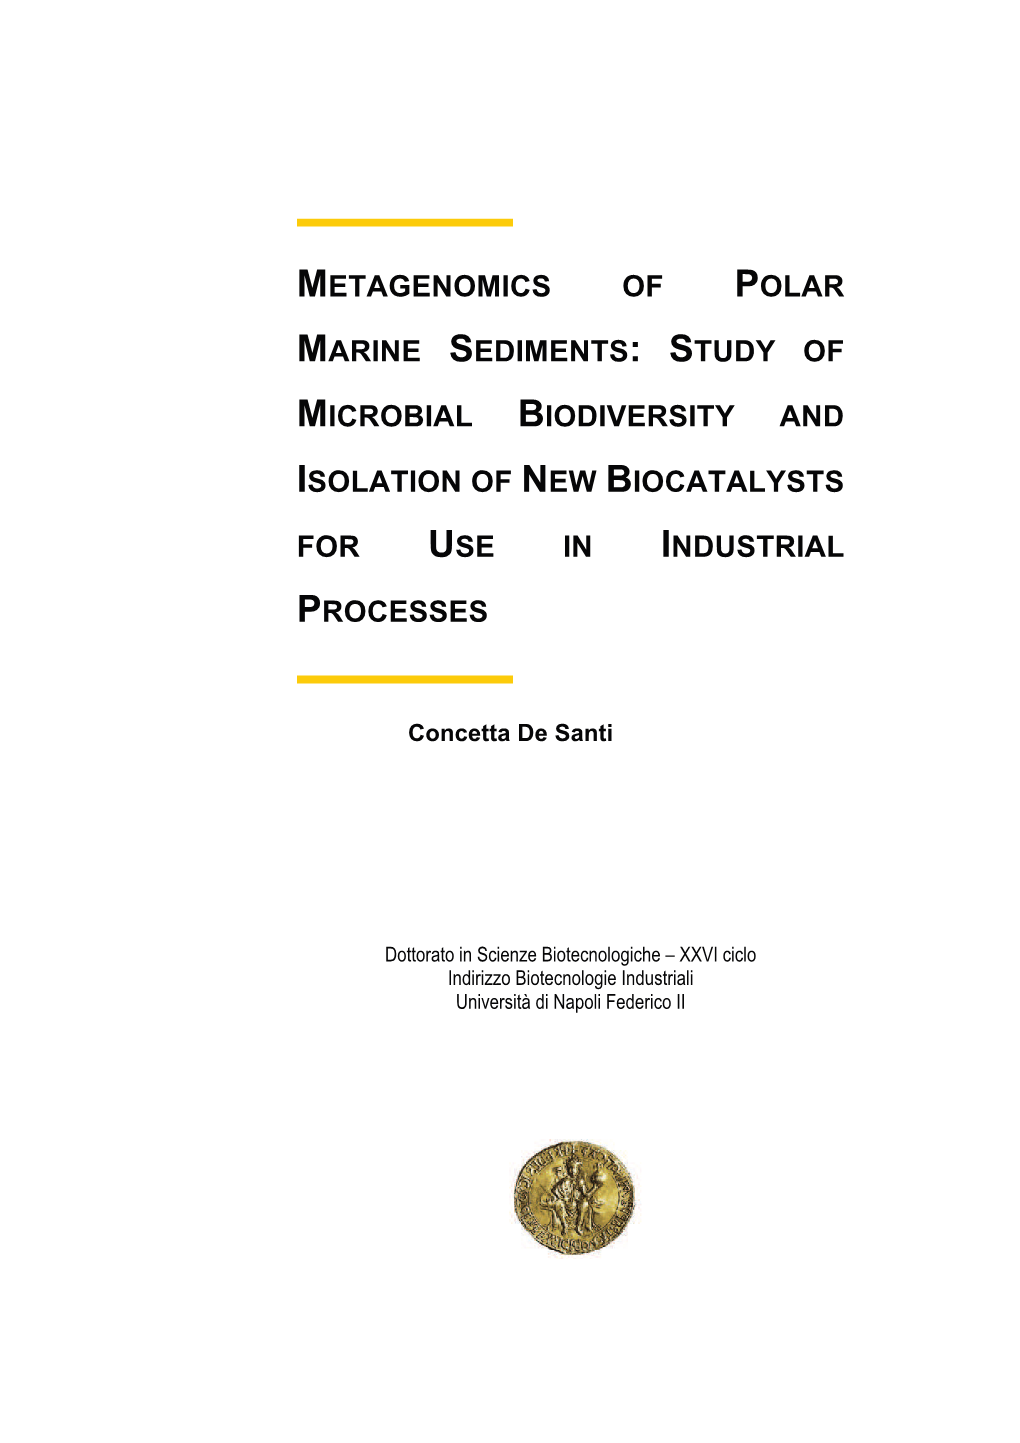 Study of Microbial Biodiversity and Isolation of New Biocatalysts